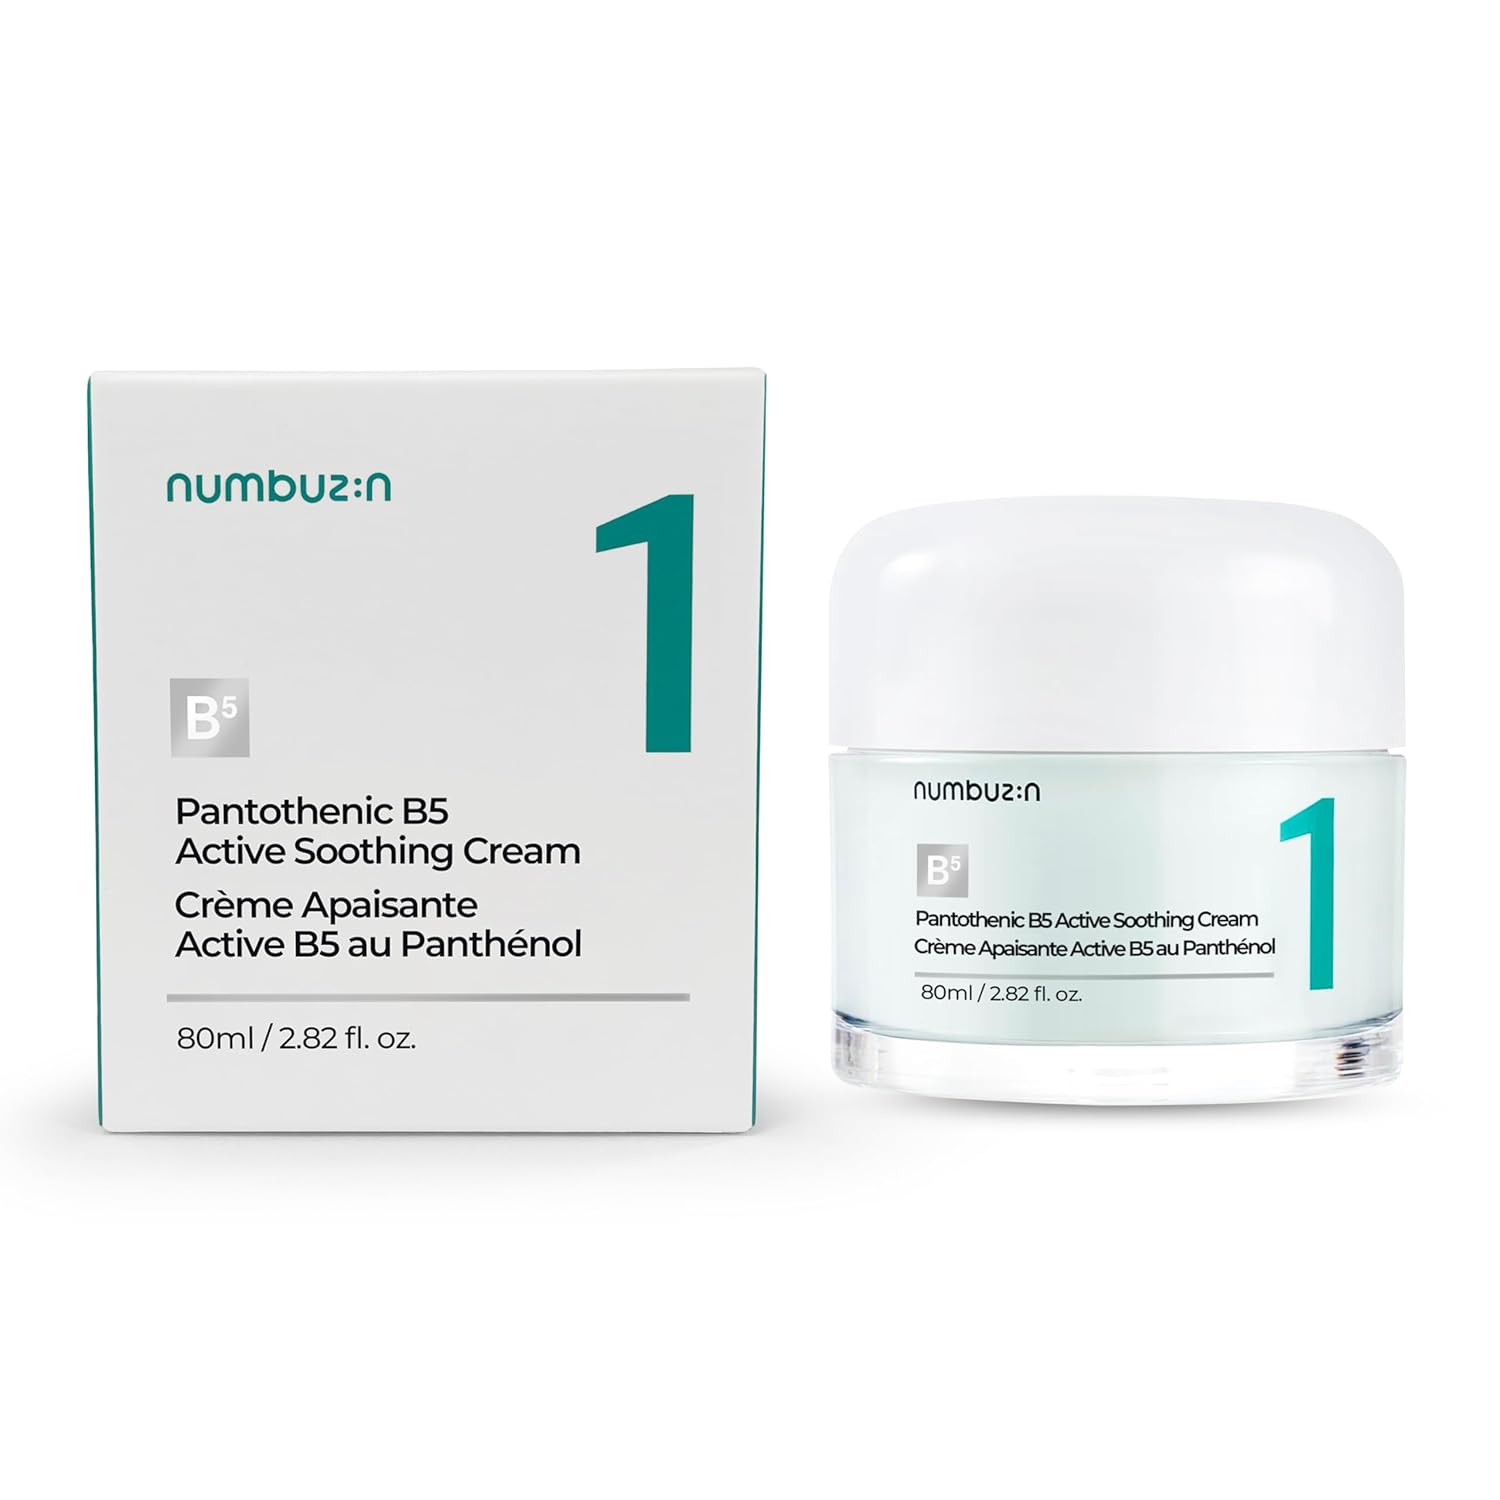 80ml Numbuzin Pantothenic B5 Active Soothing Cream - a calming cream enriched with vitamin B5.